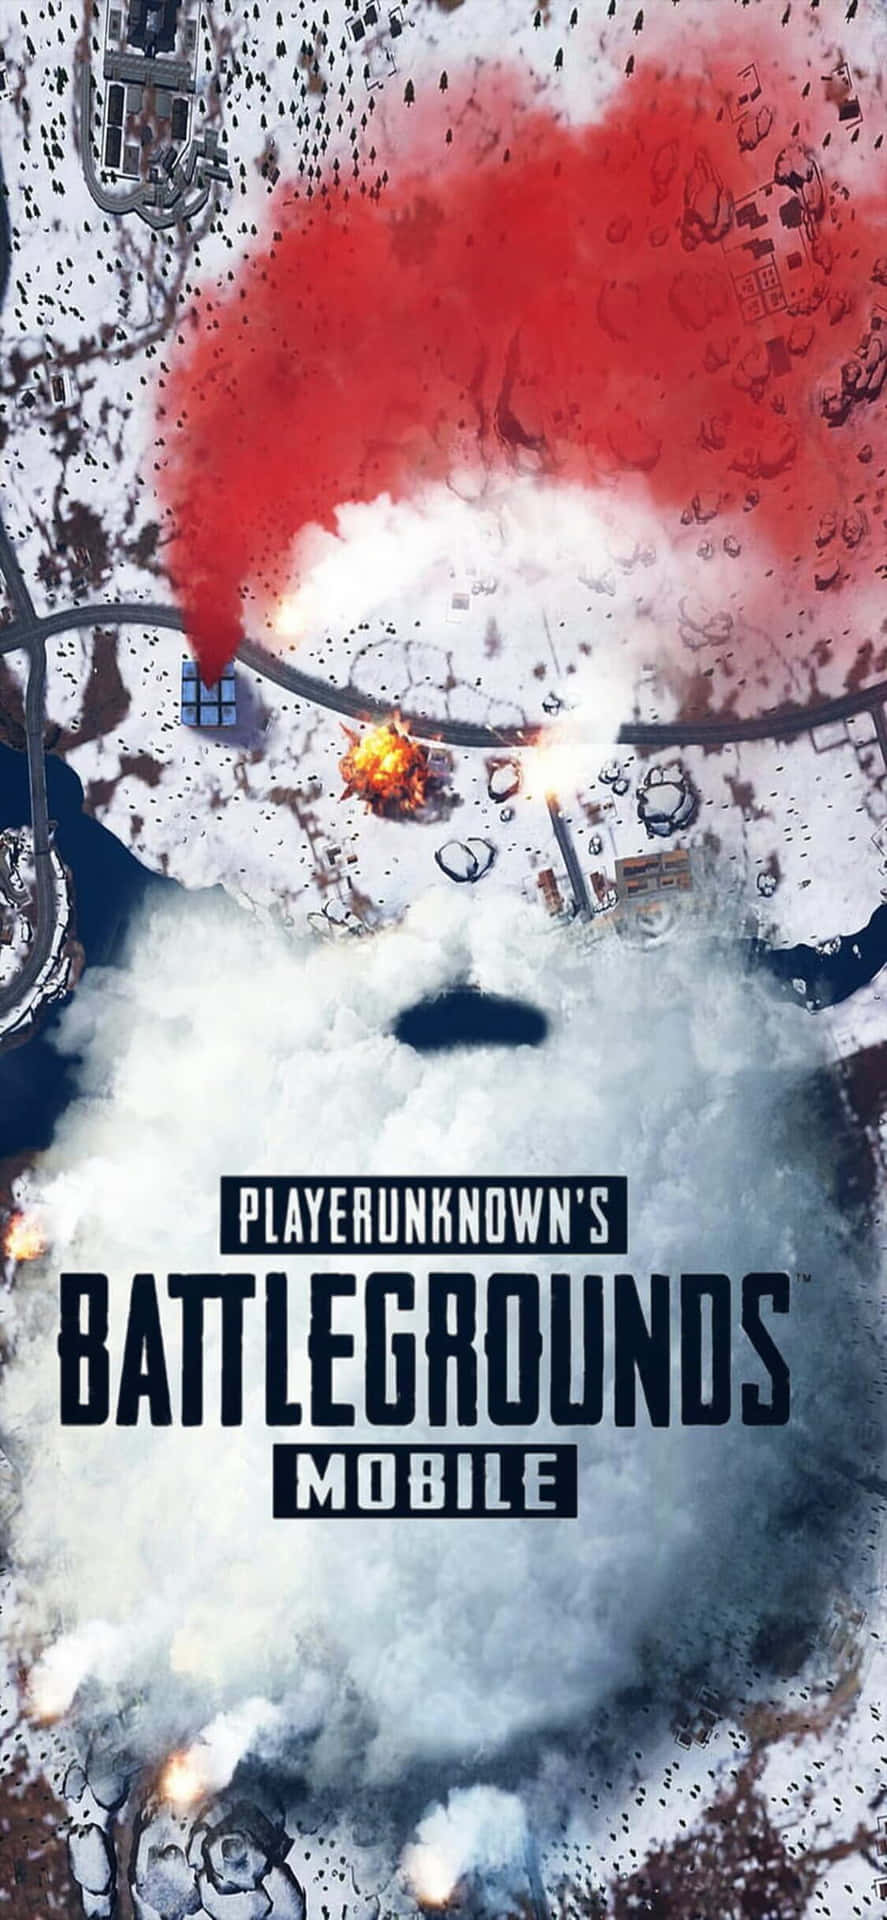 the cover of playerunknown's battlegrounds mobile